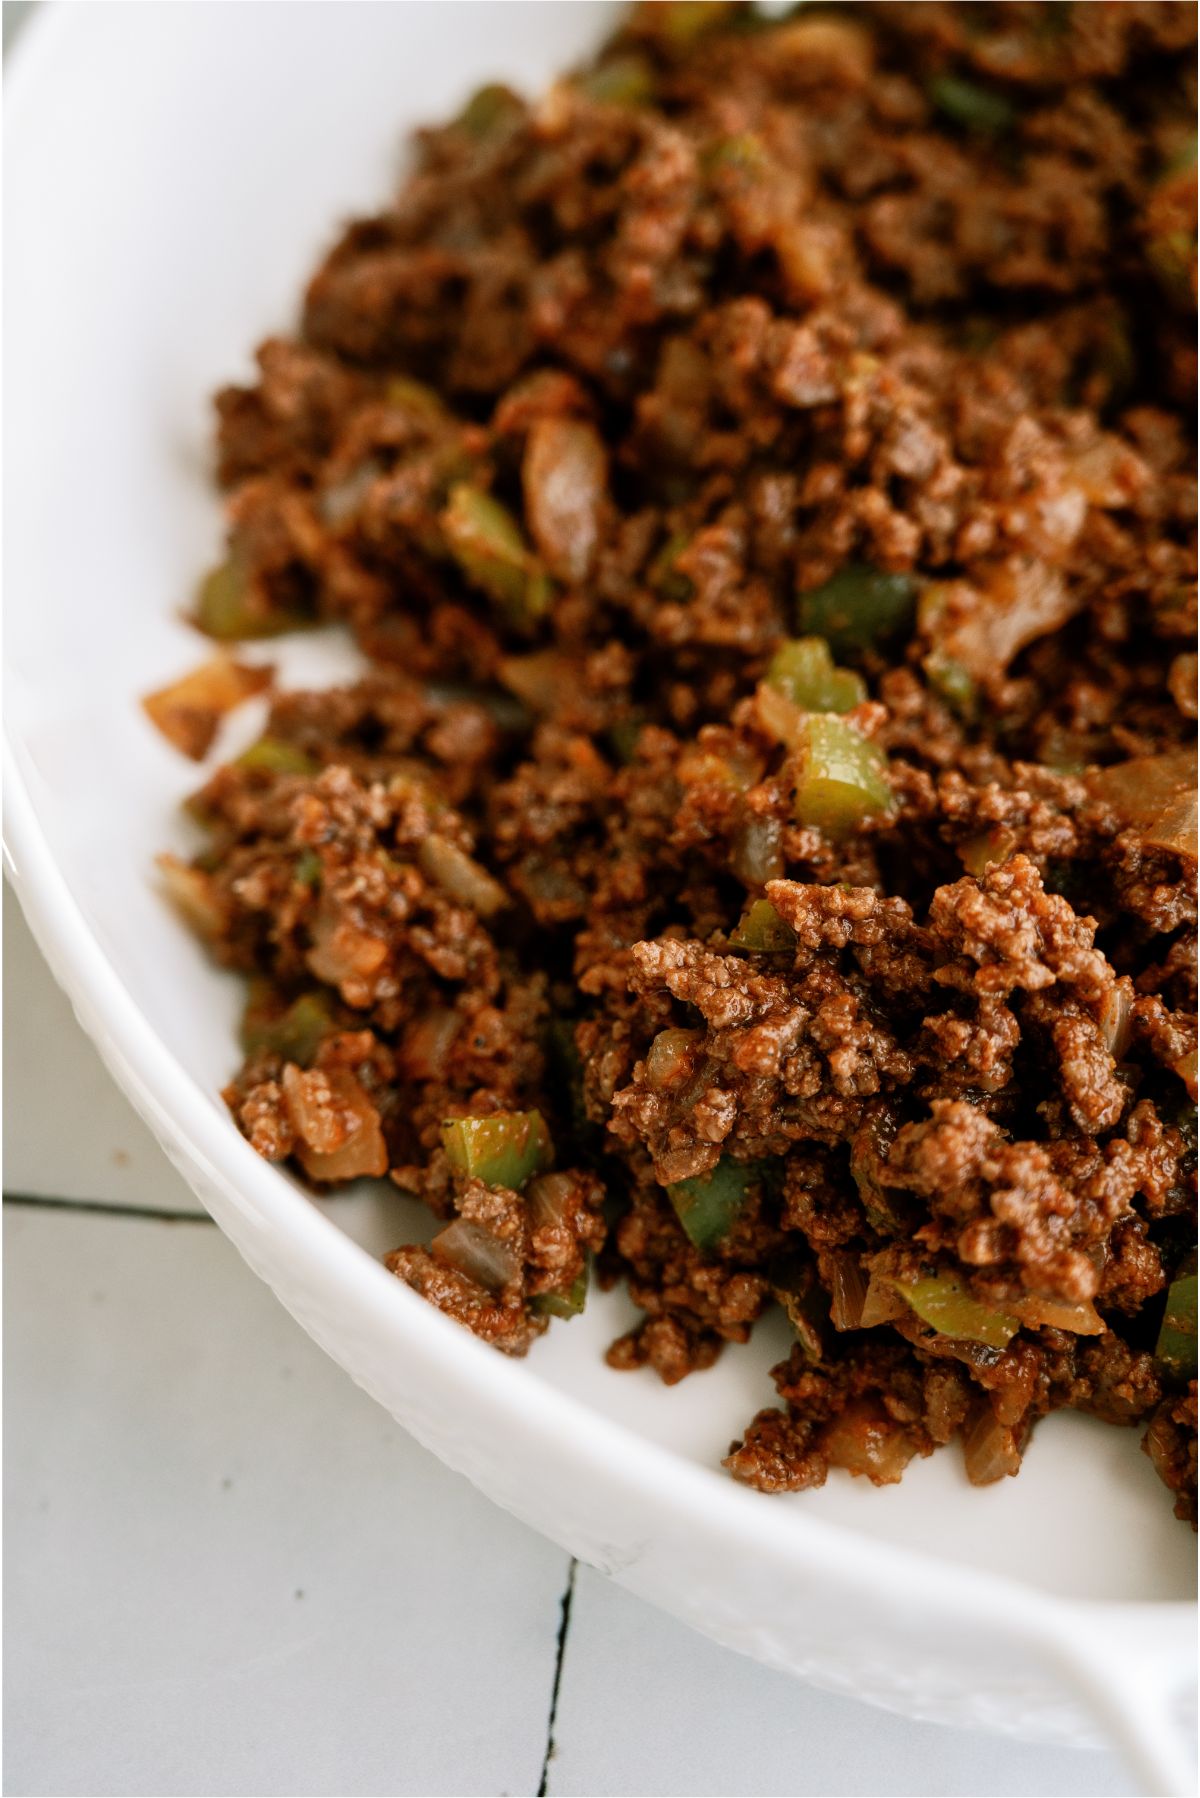 Ground beef mixture in the bottom of casserole dish